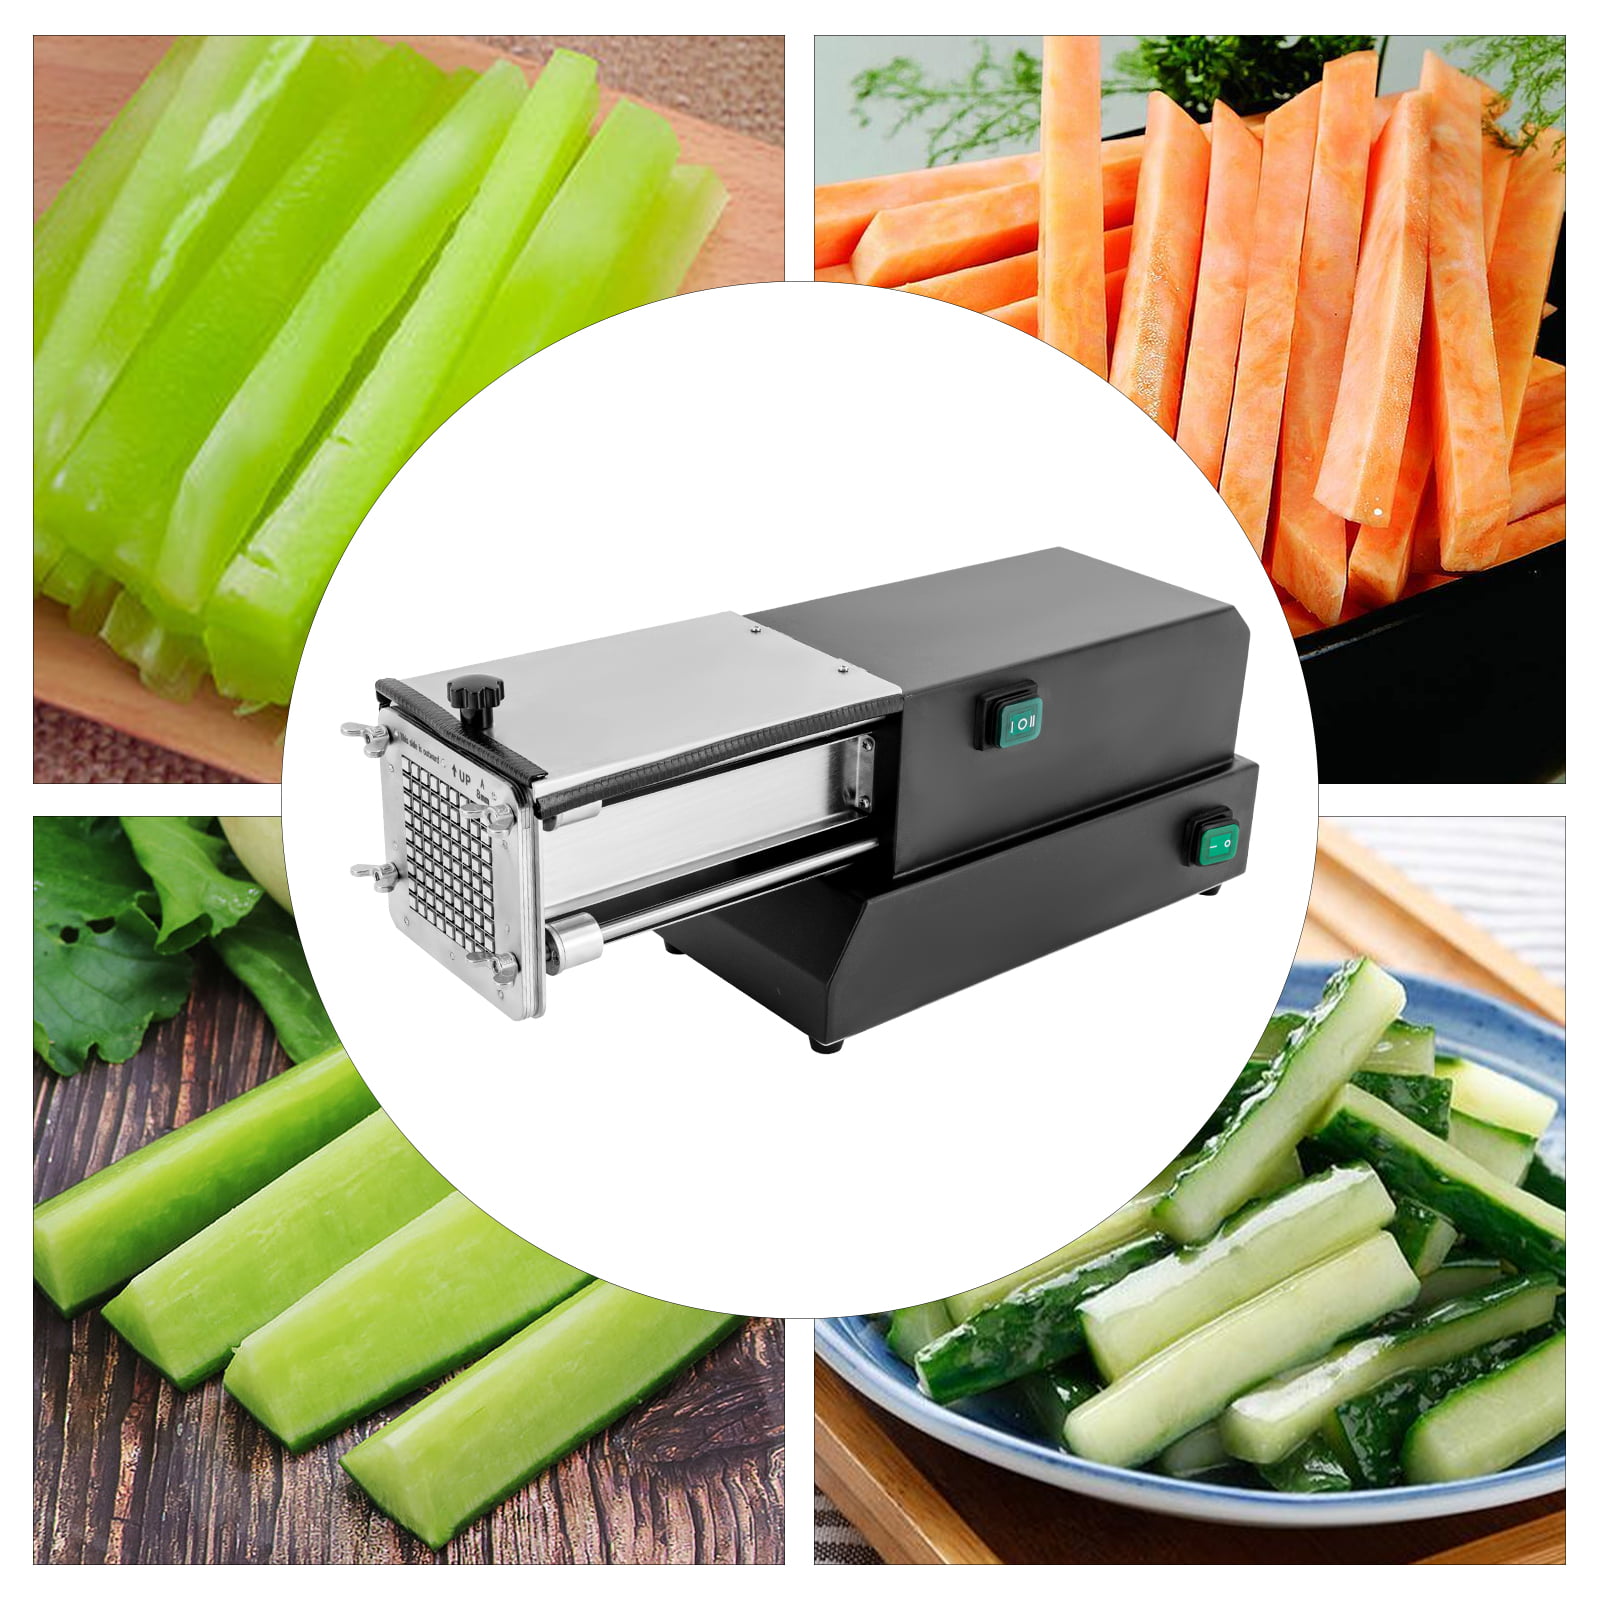 CQKWCGAB French Fry Cutter with 2 Thicker Blades | Press to Cut| non-slip  mat |Cucumber,Vegetable Carrot and Potato Slicer | Fit with Air Fryer 